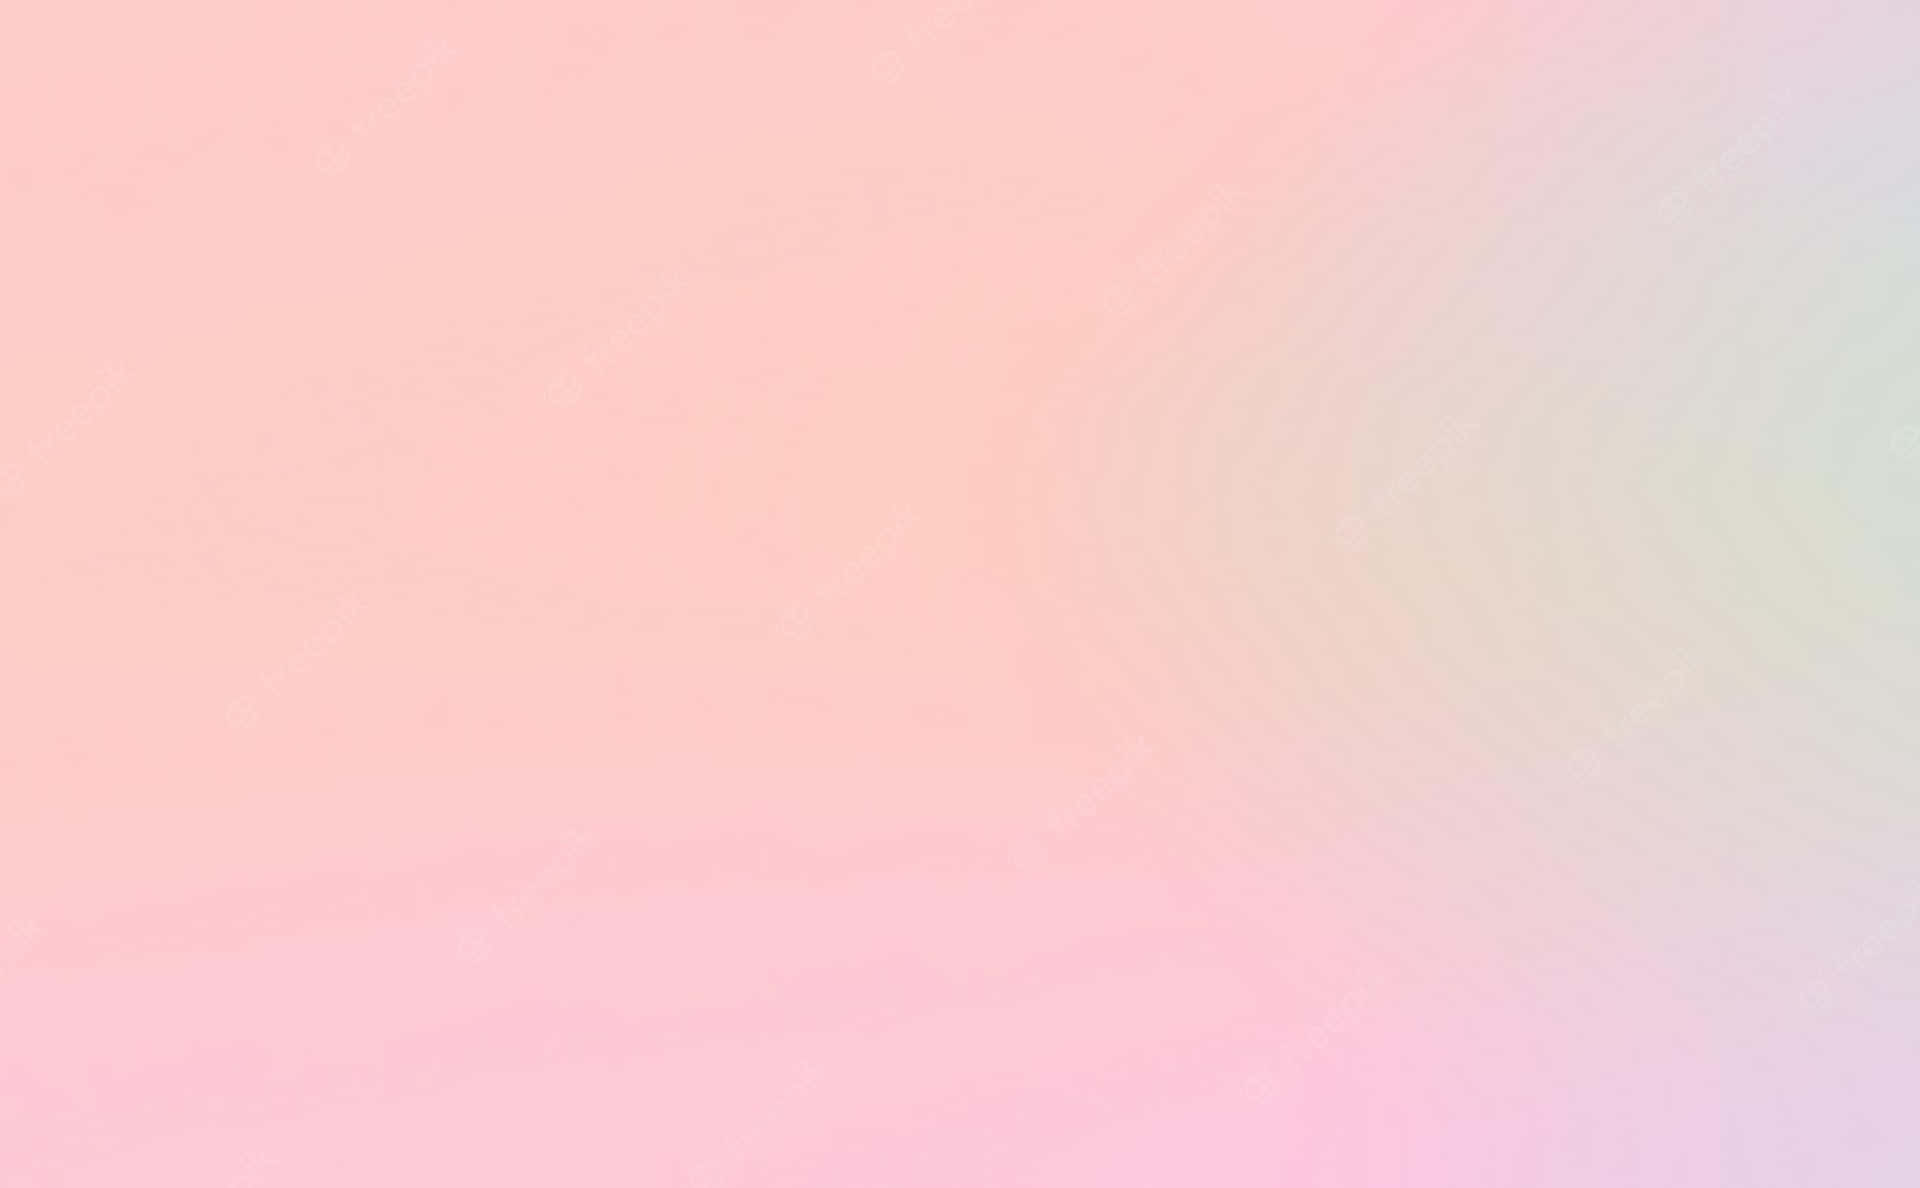 Soft Pink Pastel-colored Wallpaper